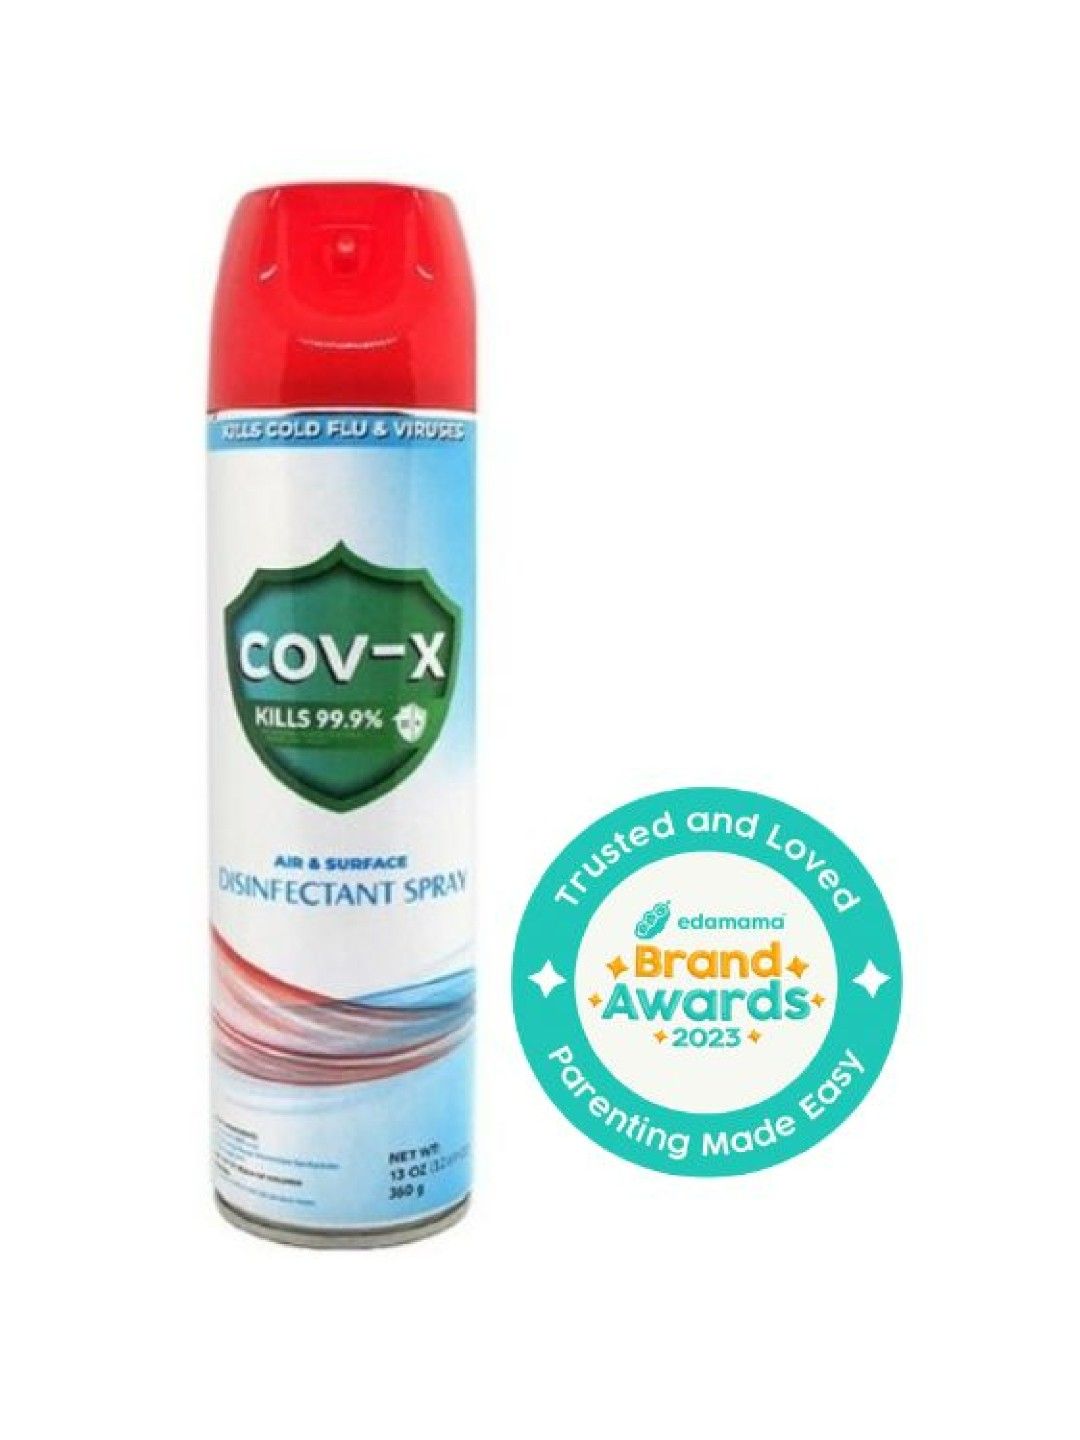 COV-X Air & Surface Disinfectant Spray 360g-Tested & proven to kill the COVID-19 virus